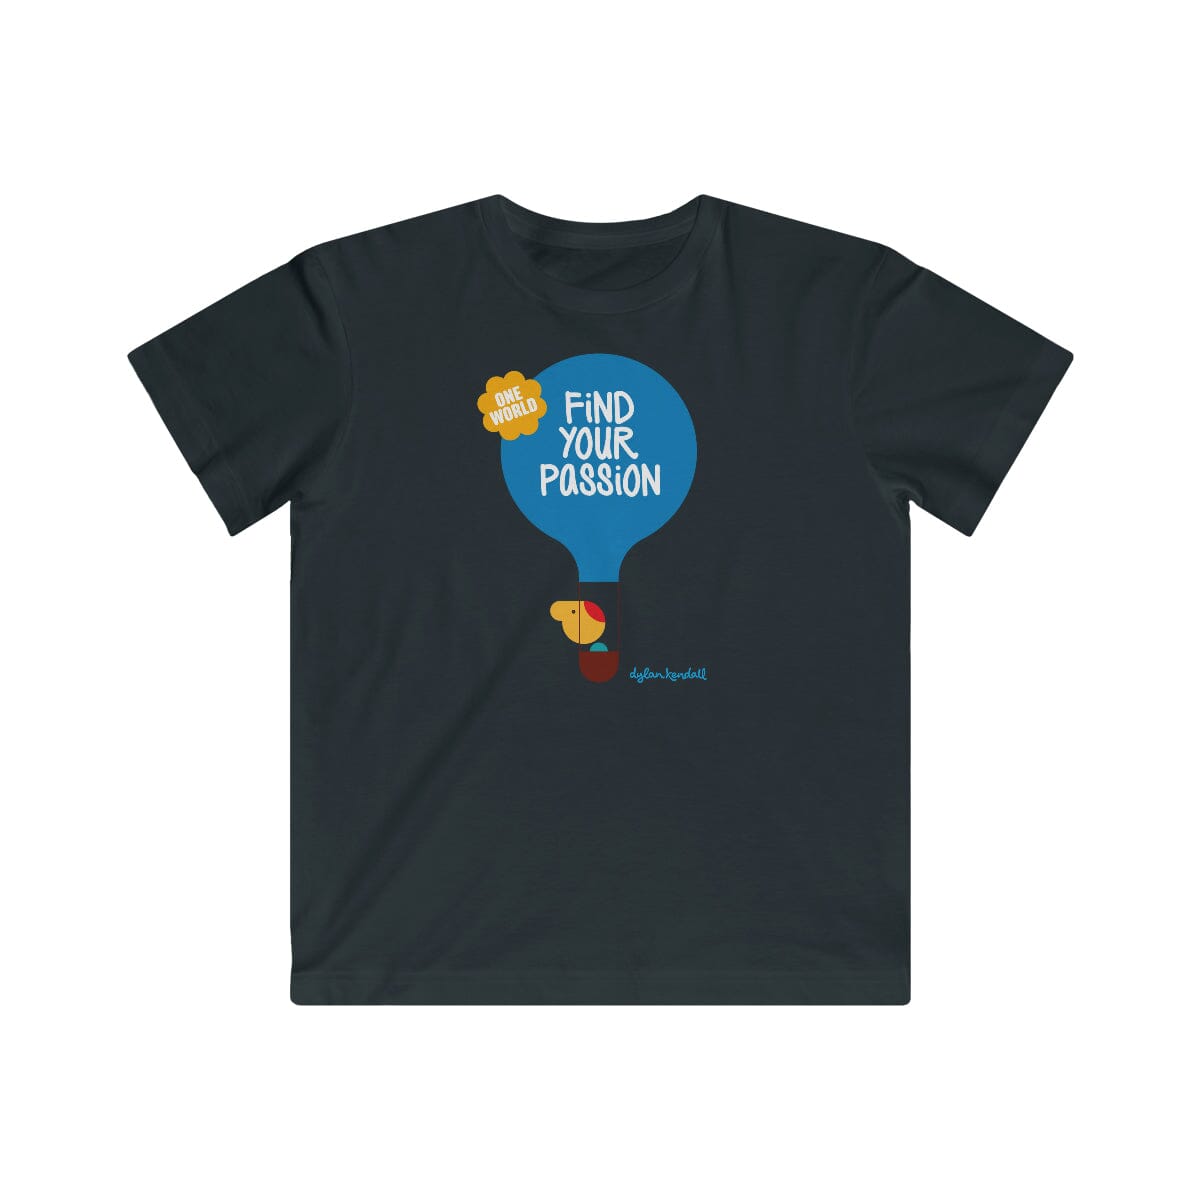 Passion! T-Shirt Your | Kids Find